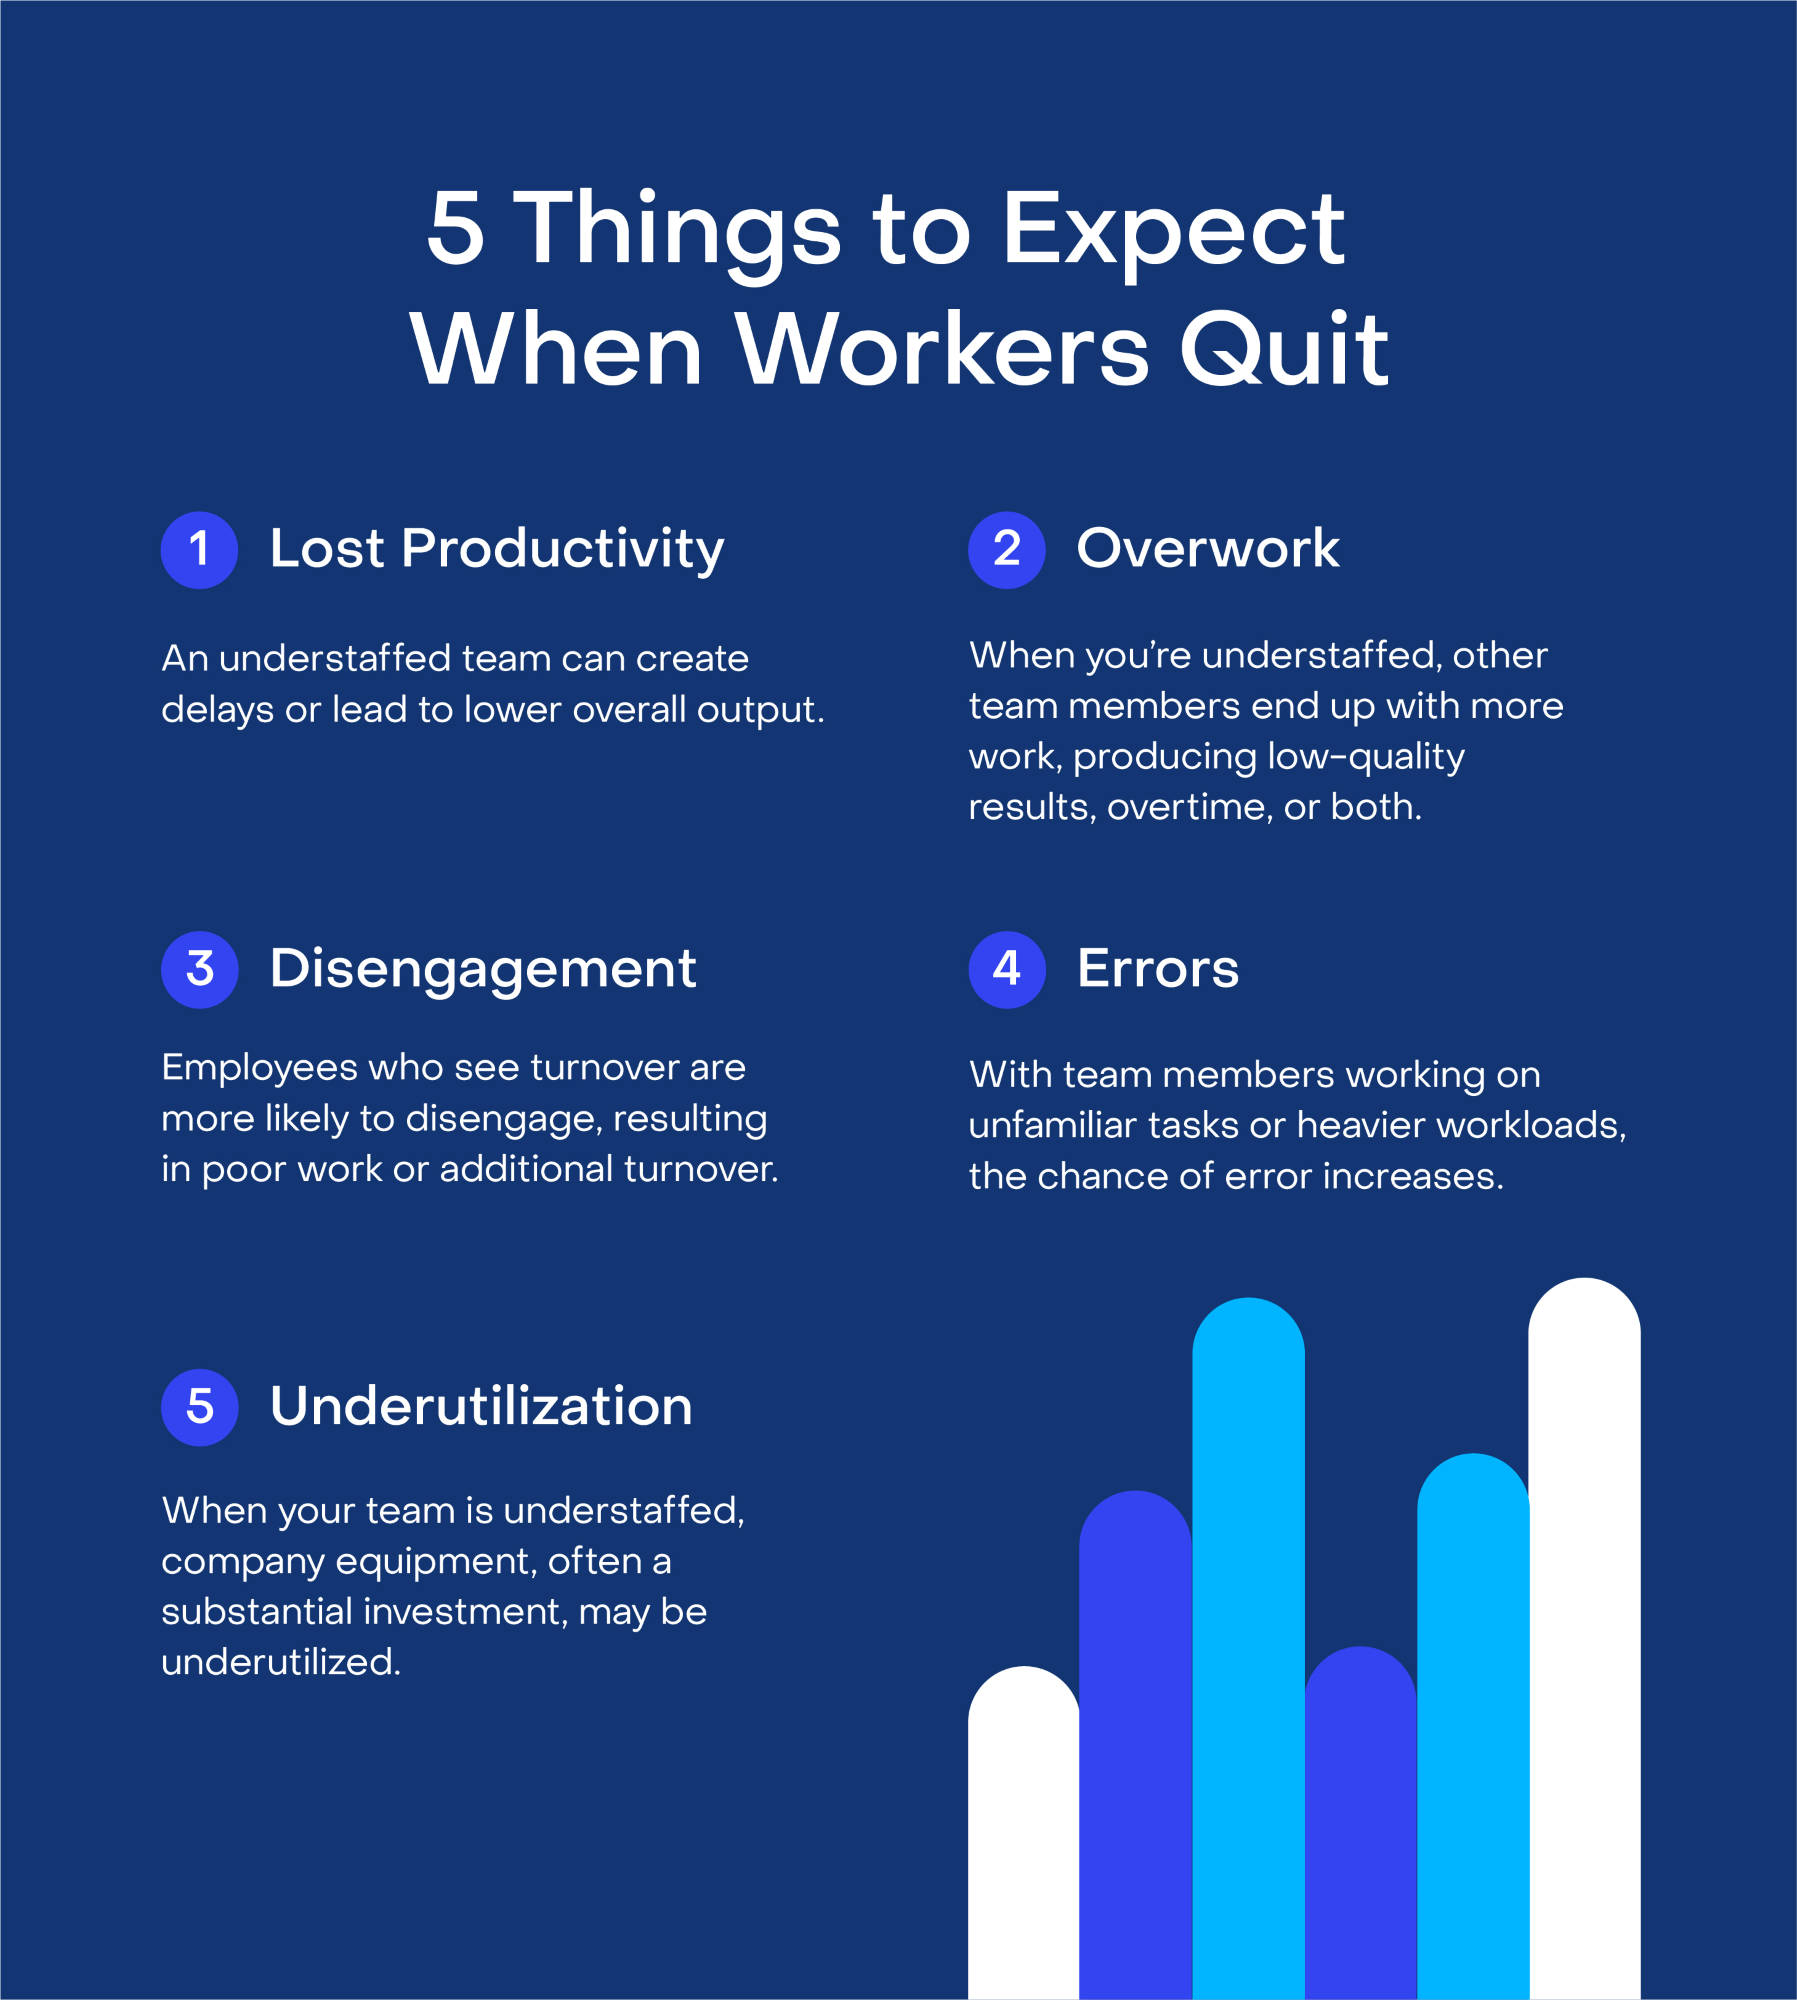 Infographic detailing what to expect when workers quit: lost productivity, overwork, disengagement, errors, and underutilization